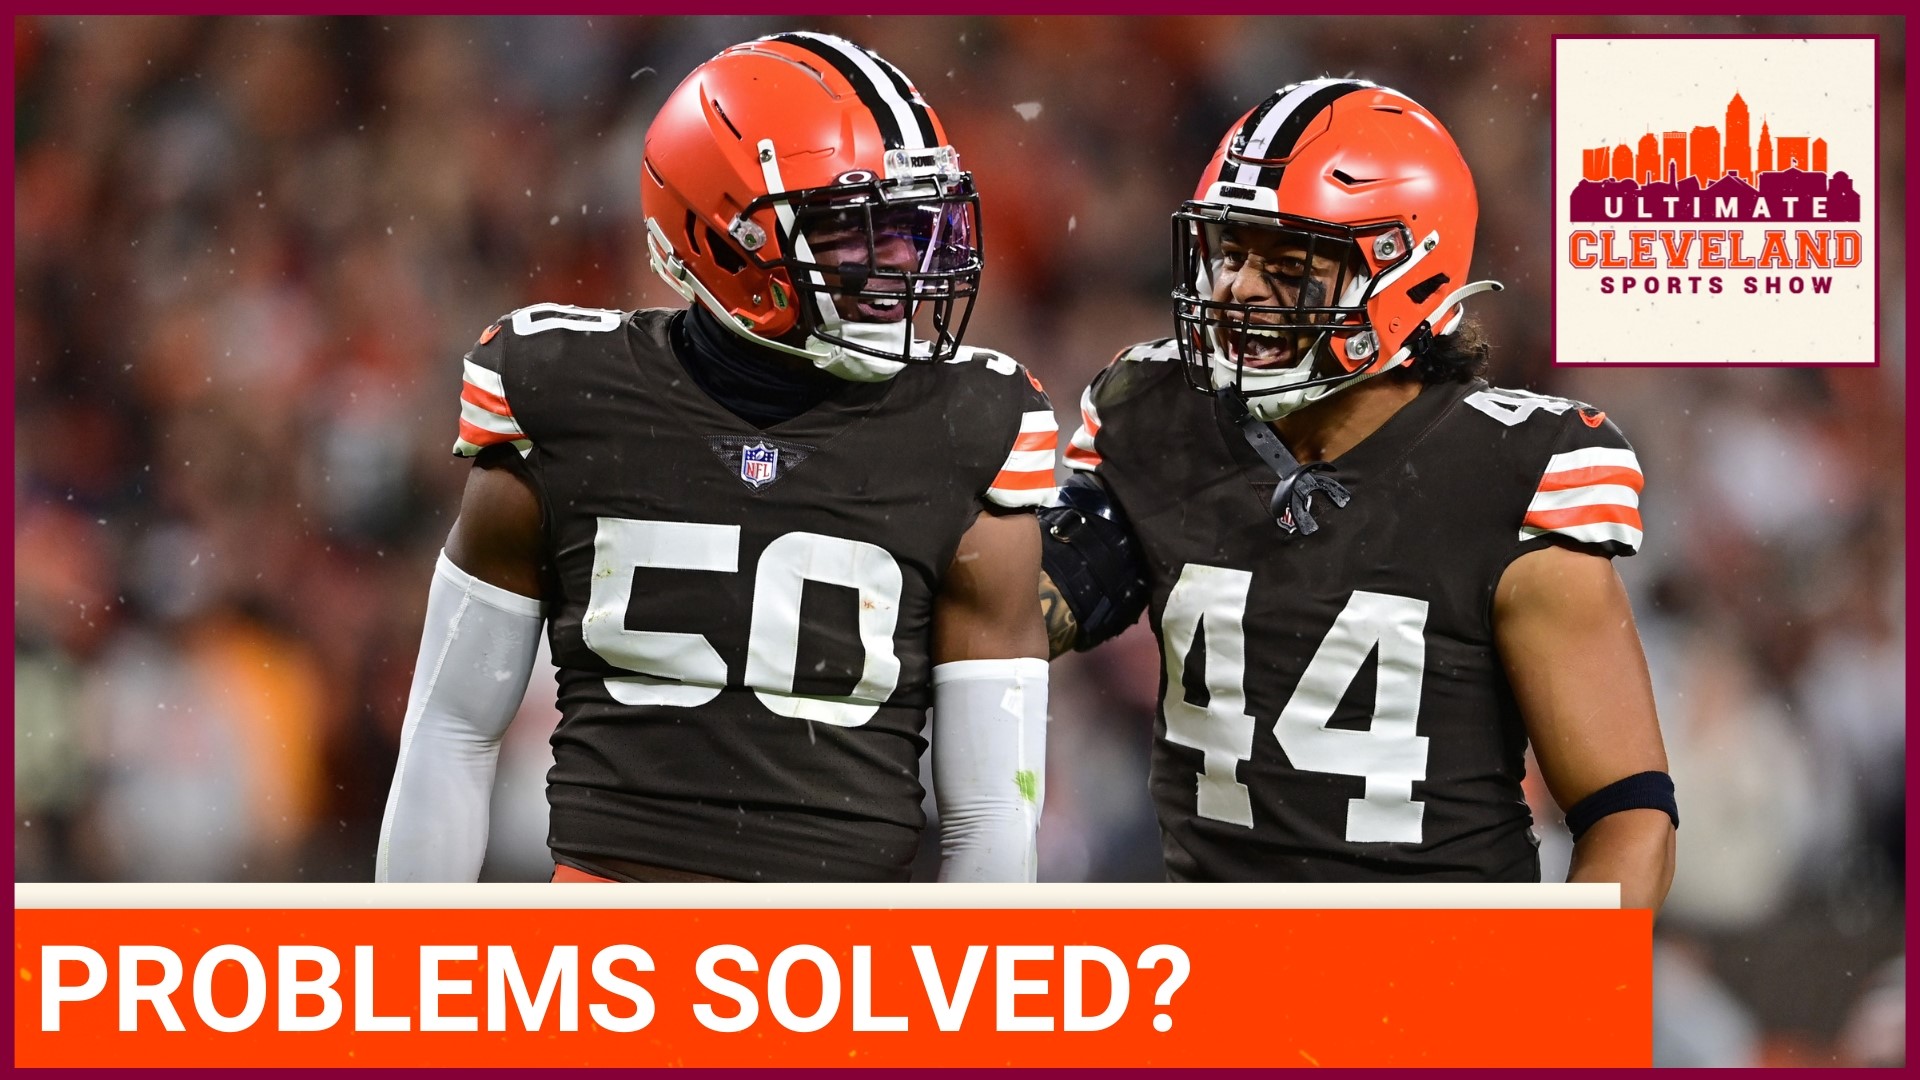 The Cleveland Browns defense did enough to come away victorious but former Browns Linebacker D'Qwell Jackson says the defense still needs work.